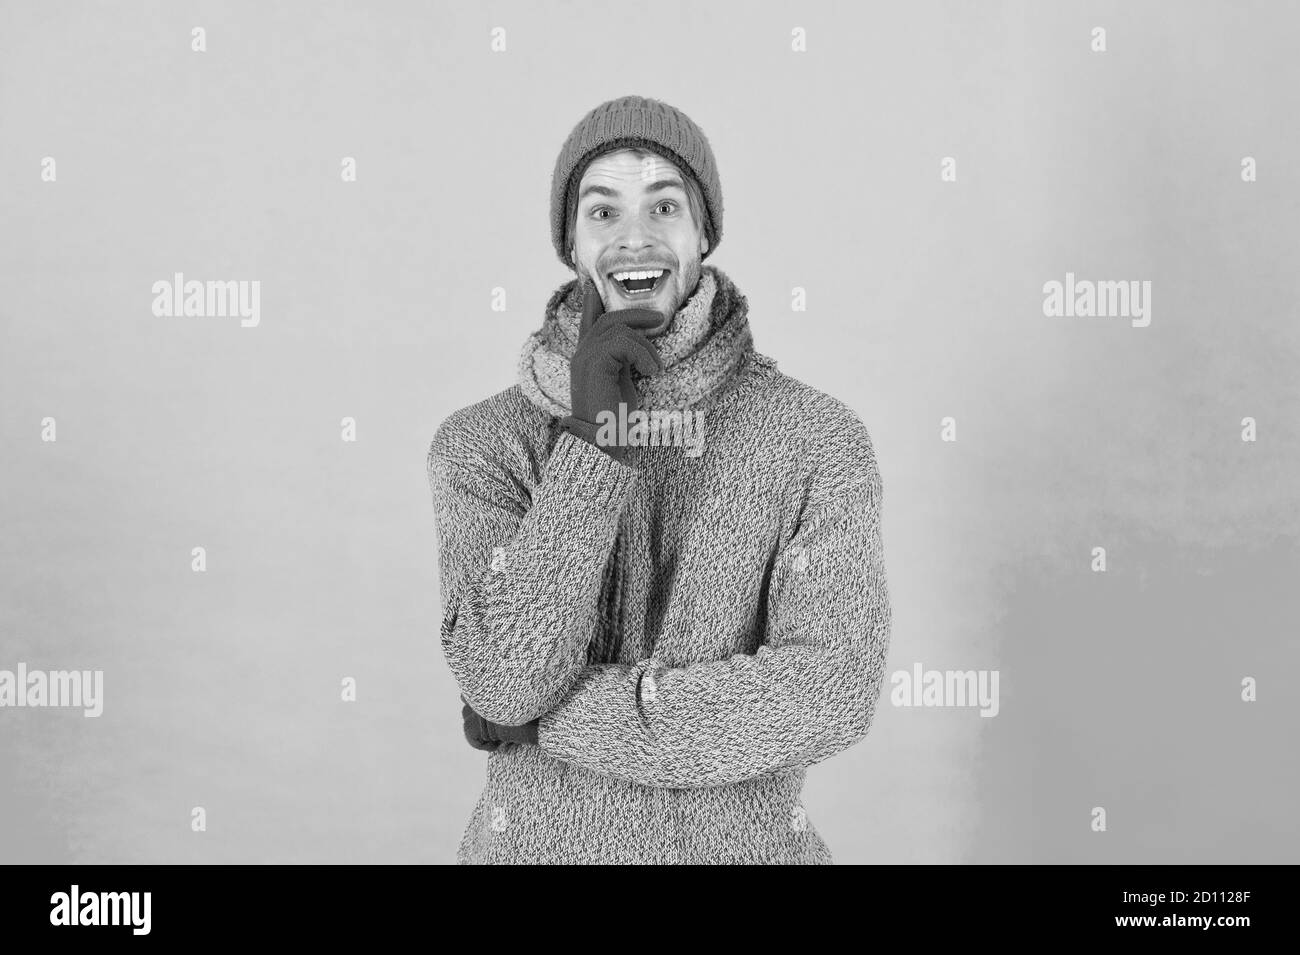 When weather turns chilly. Happy man in winter style blue background. Handsome guy in casual comfy style. Winter fashion and accessories. Keep warm in style. Maintaining your style is easy. Stock Photo